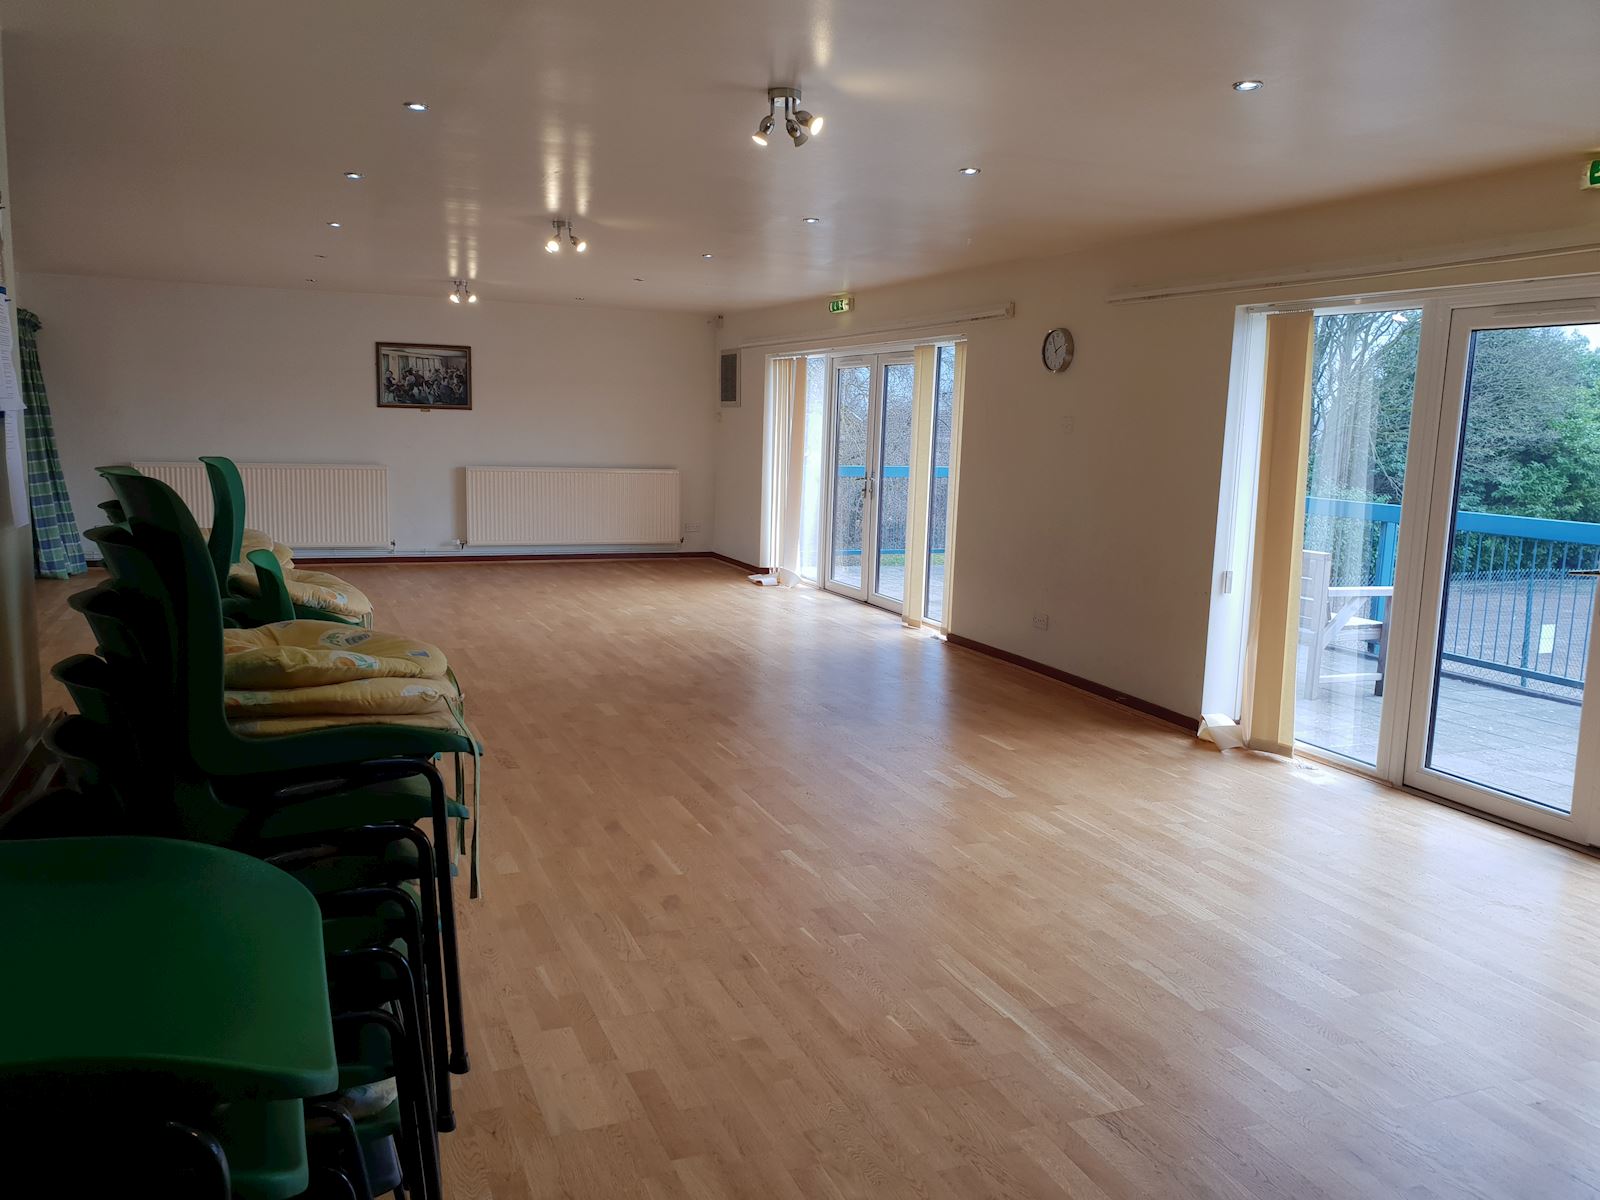 Upstairs function room 1